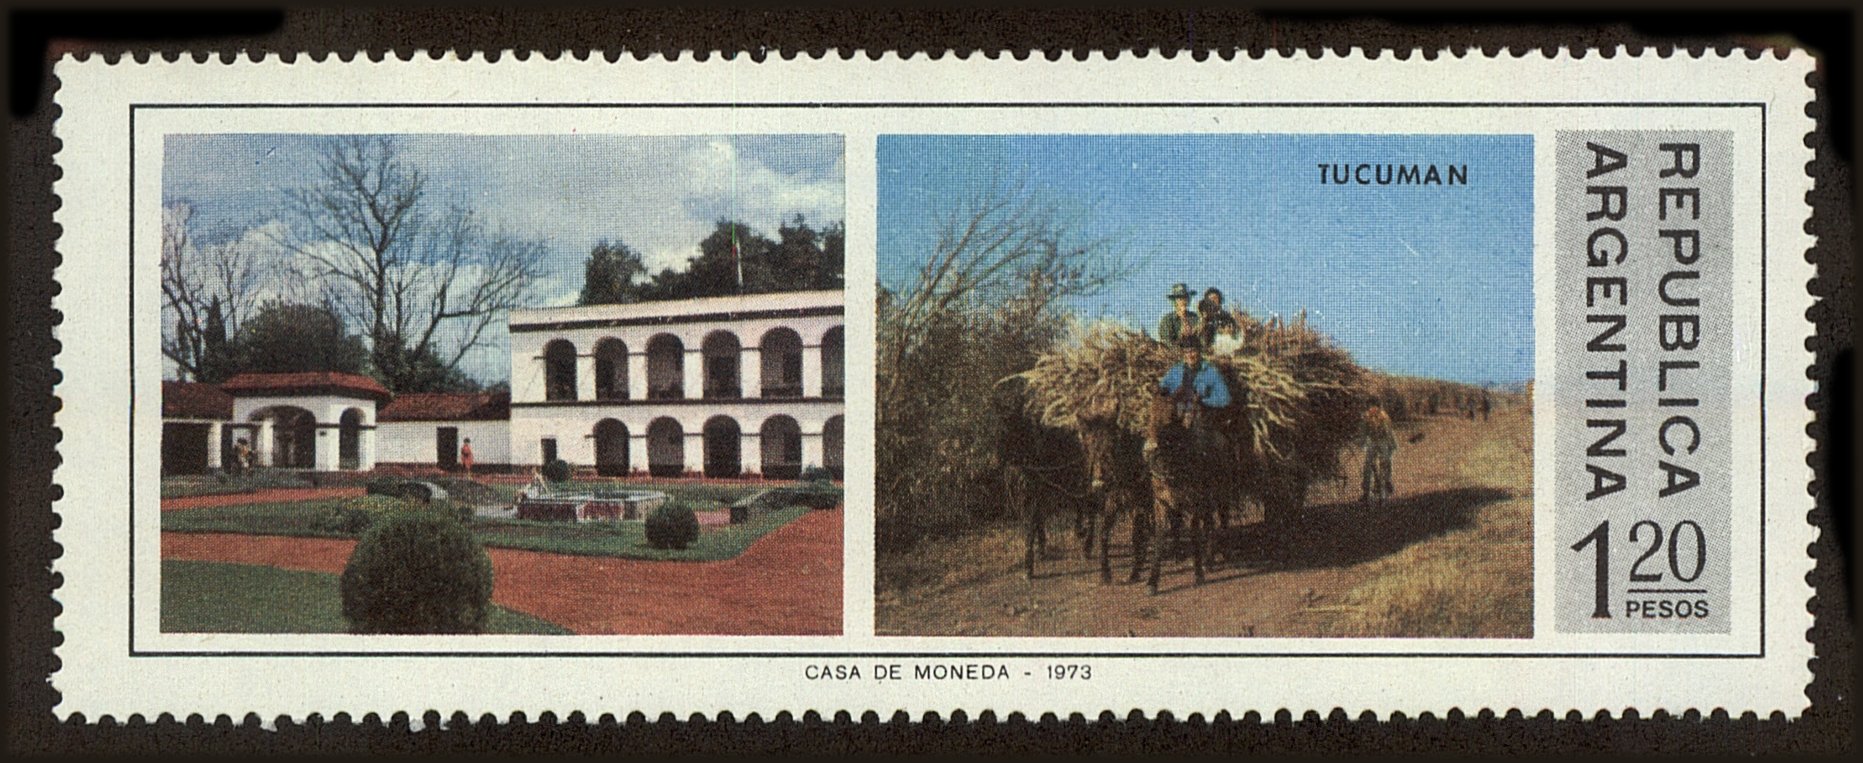 Front view of Argentina 1062 collectors stamp